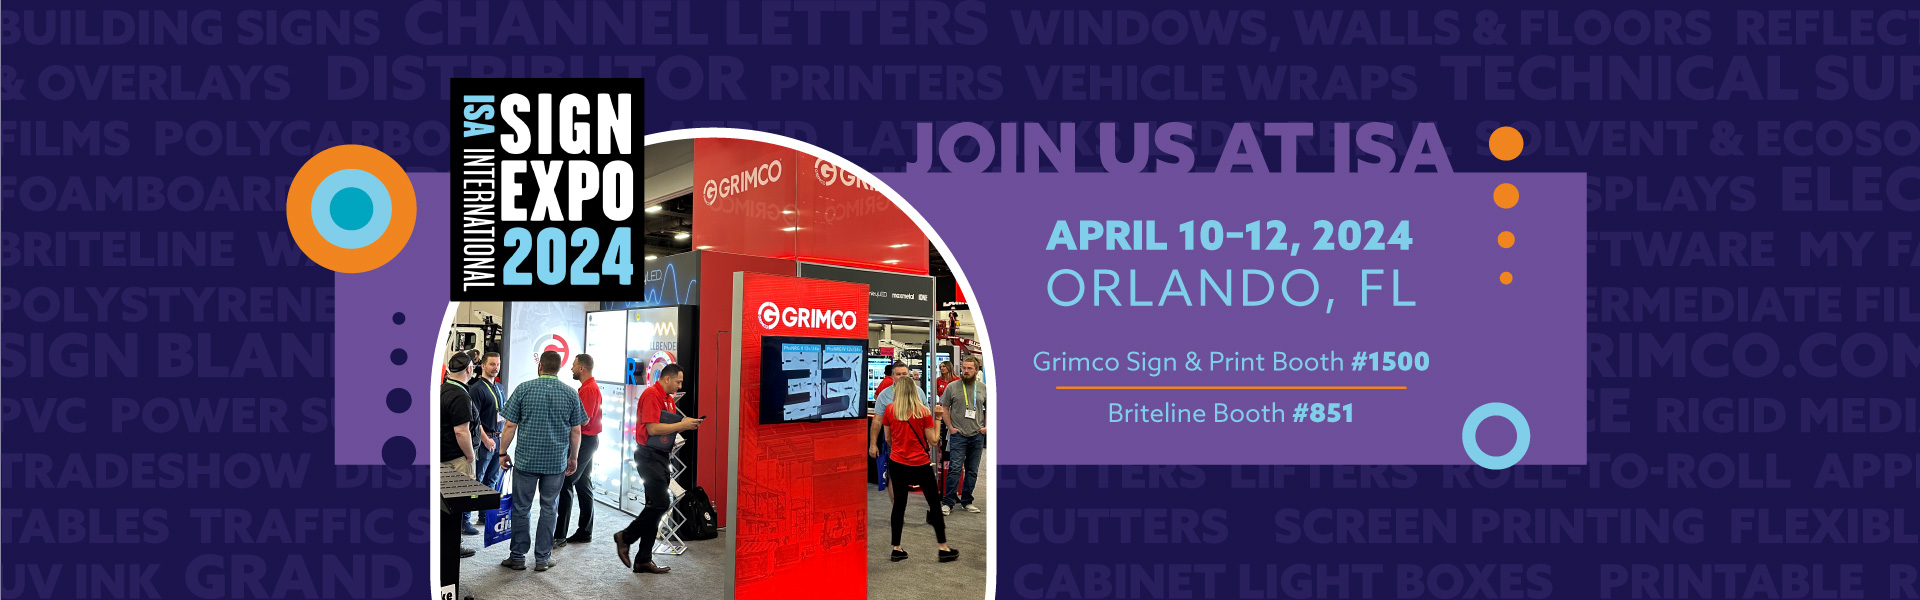 ISA Sign Expo 2024 Join Grimco at ISA April 10-12, 2024 in Orlando. FL